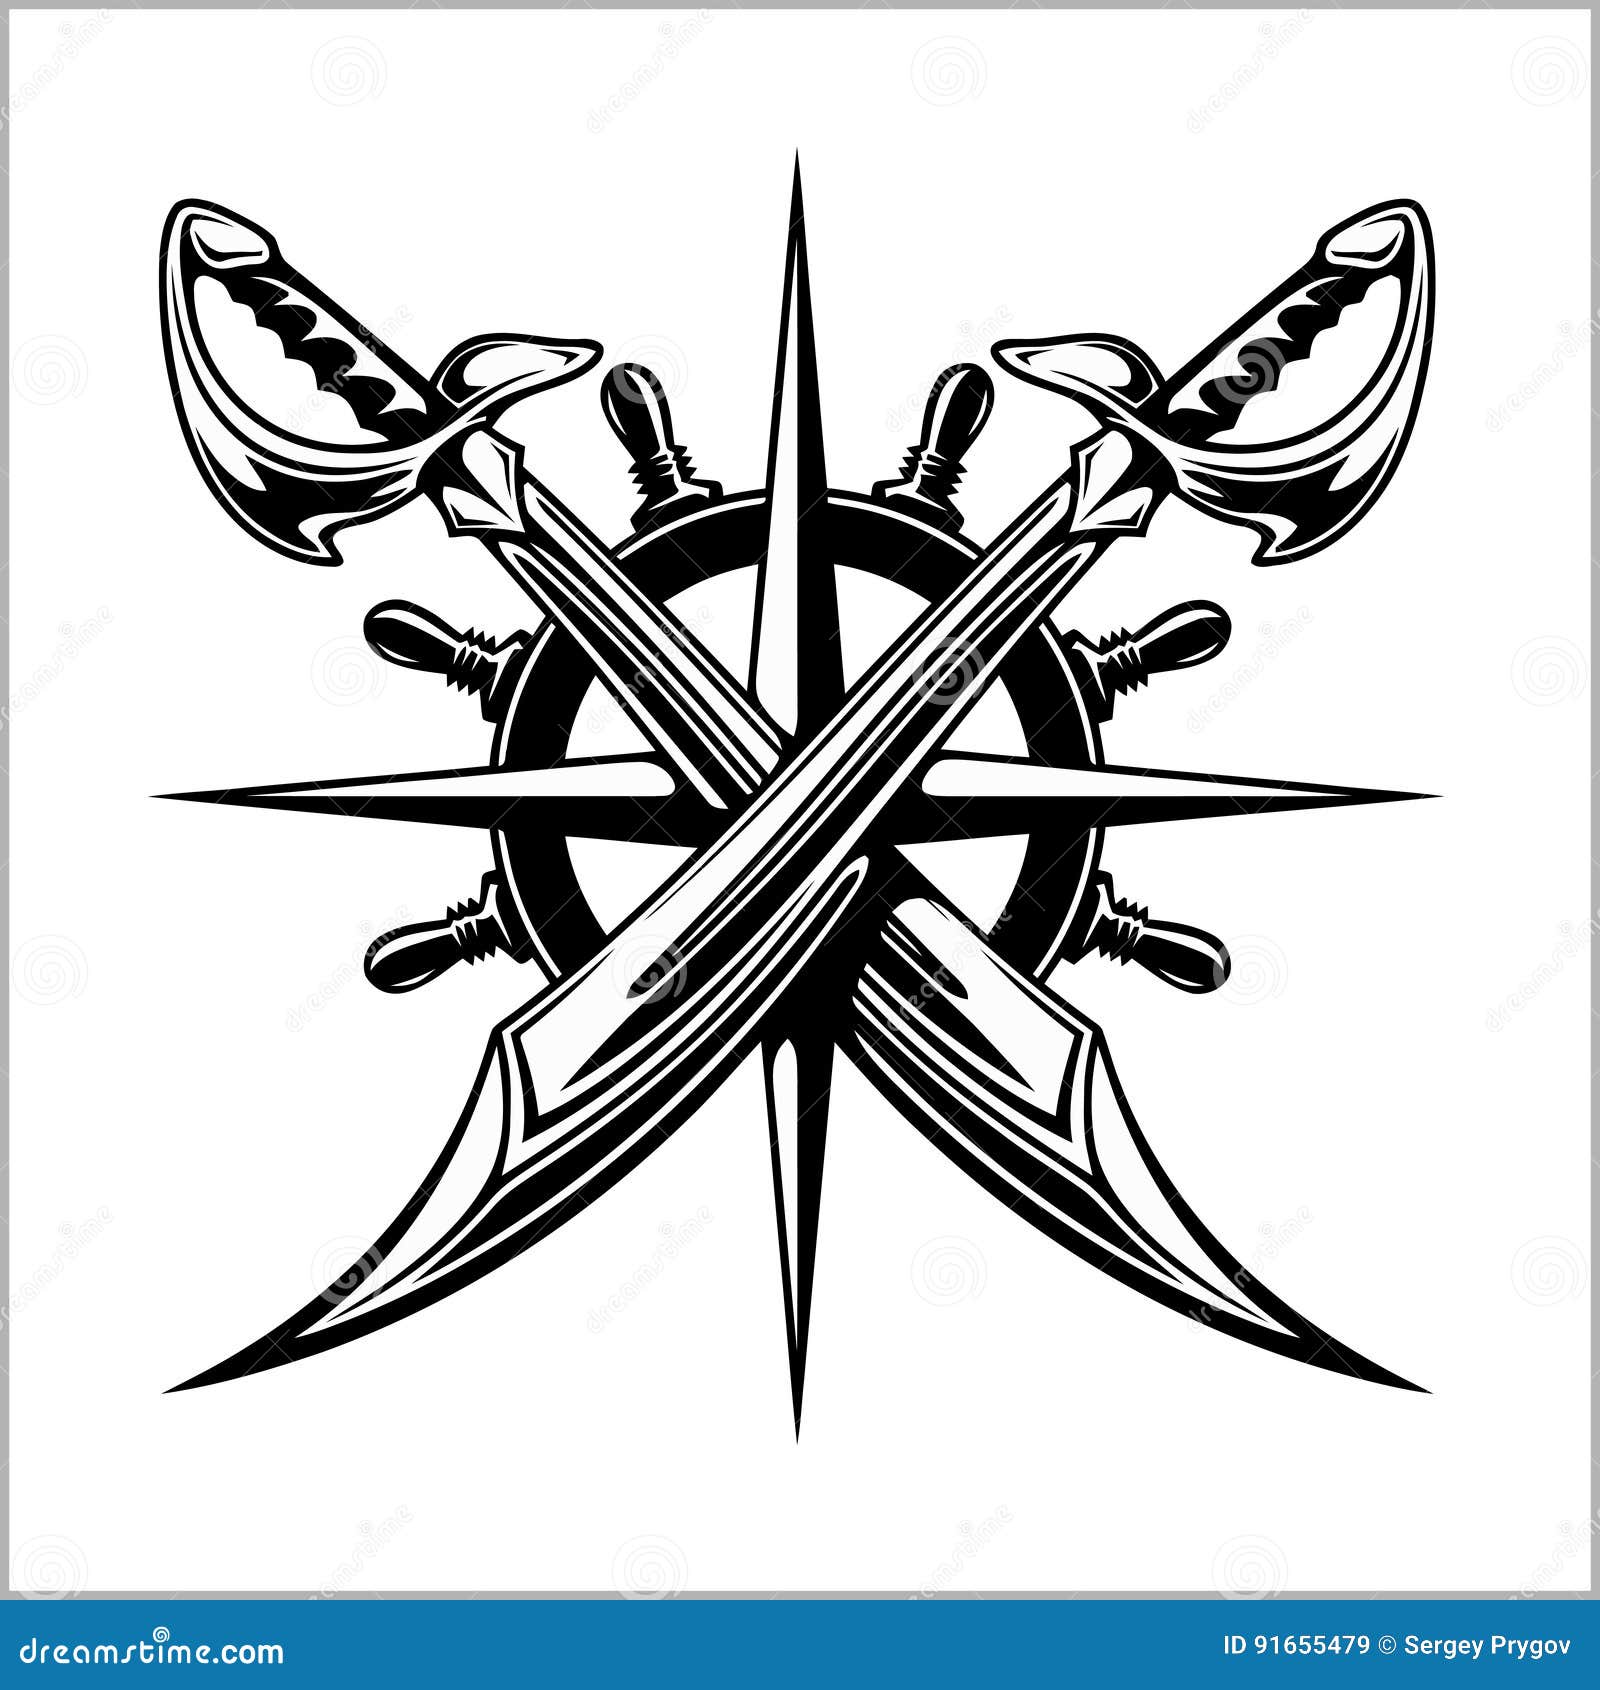 125 Awesome Sword Tattoo Ideas for the Viking in You